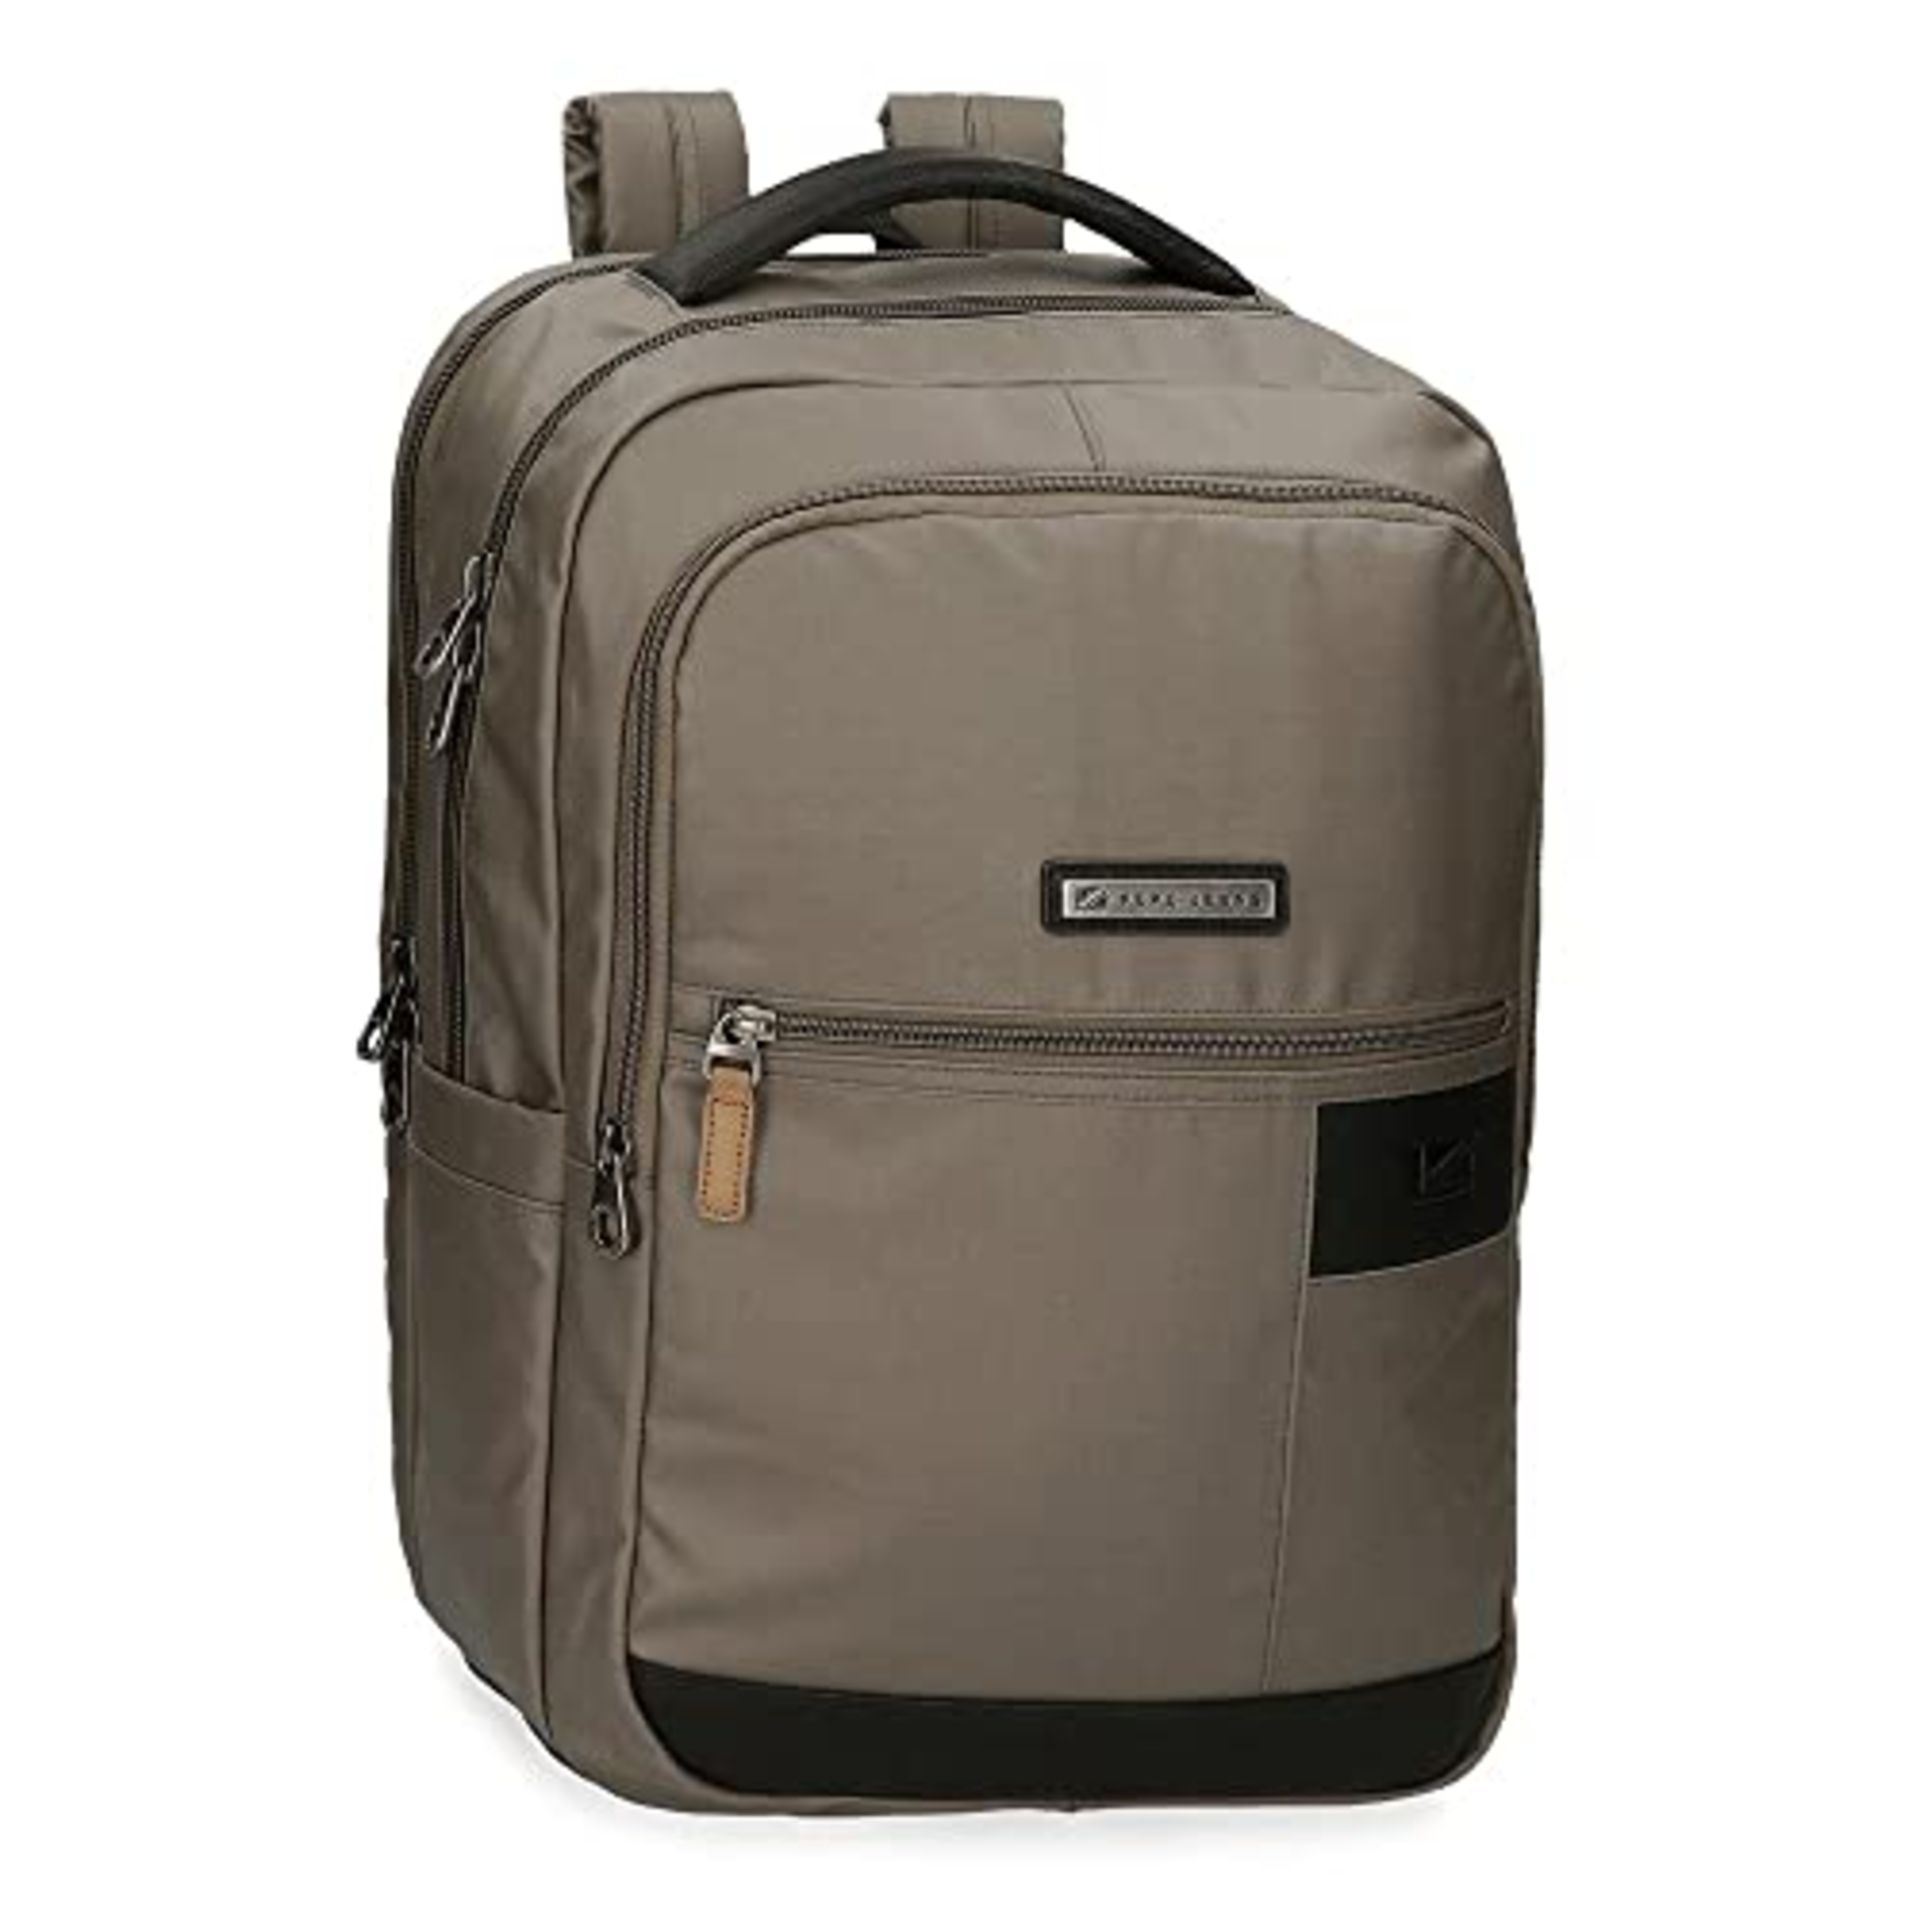 RRP £60.00 Pepe Jeans Bremen Laptop Backpack, double, adjustable, 15.6 inch, brown, 31 x 44 x 15